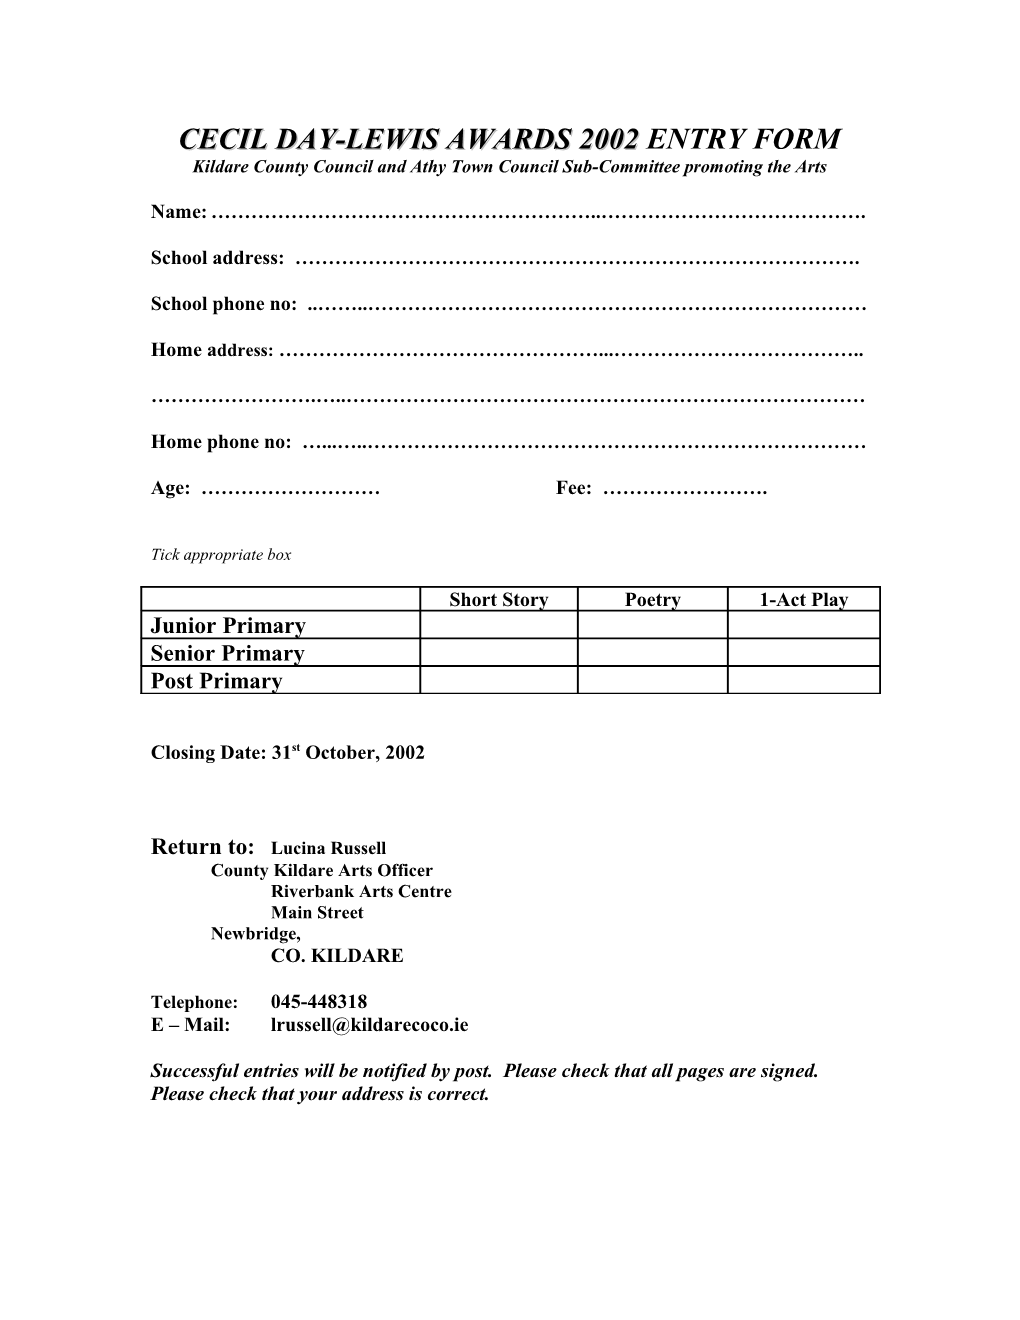 Cecil Day-Lewis Awards 2002 Entry Form